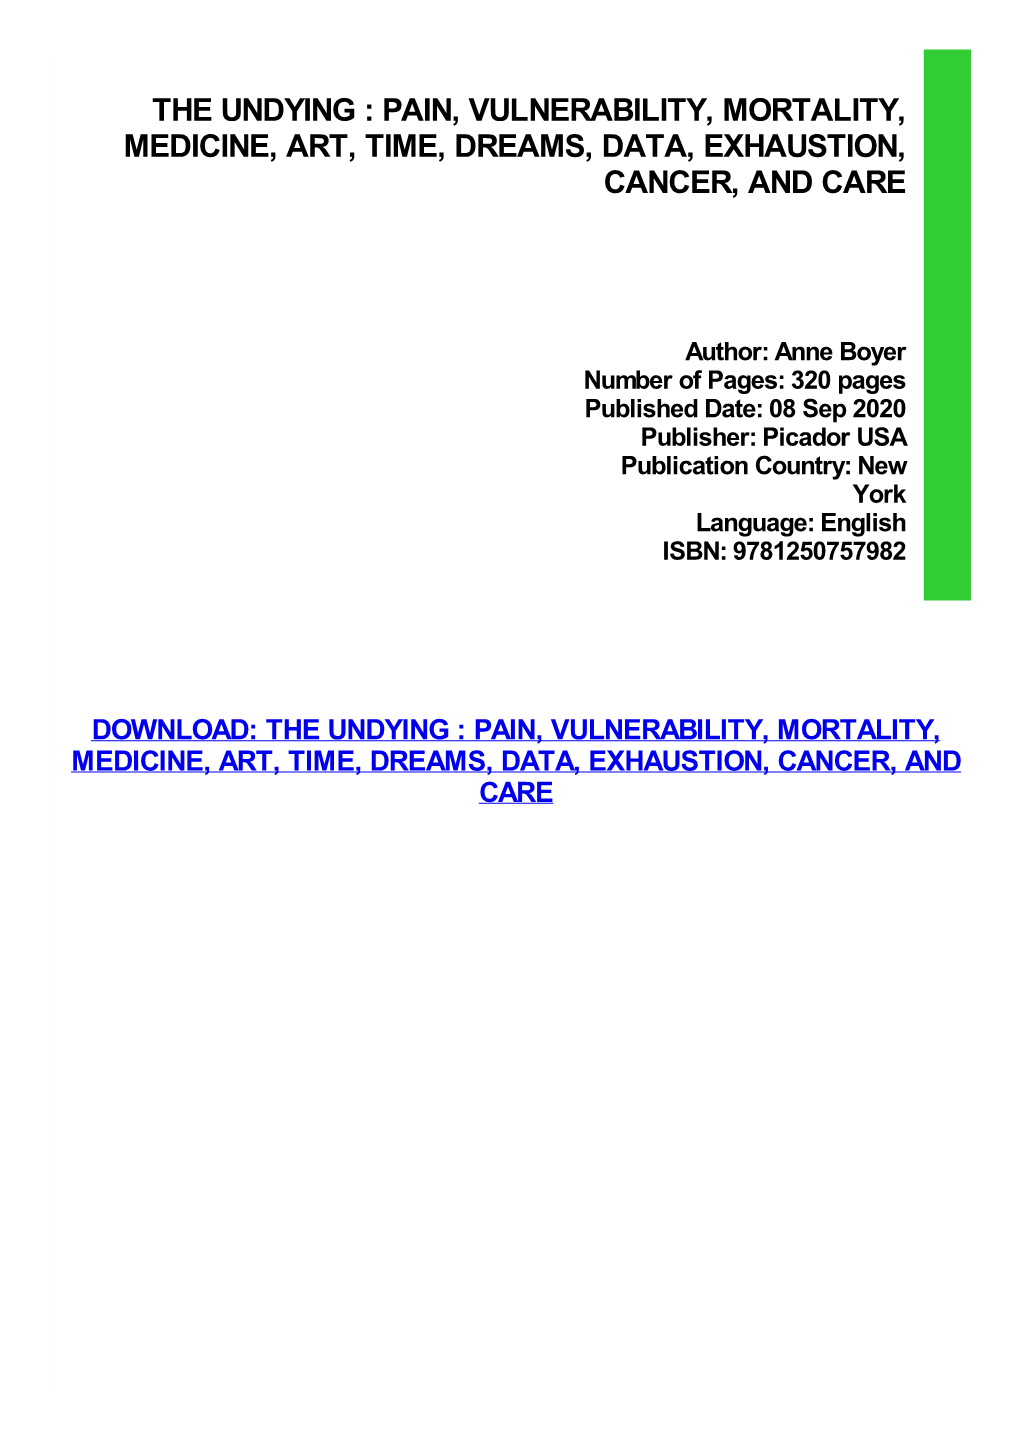 The Undying : Pain, Vulnerability, Mortality, Medicine, Art, Time, Dreams, Data, Exhaustion, Cancer, and Care Ebook, Epub